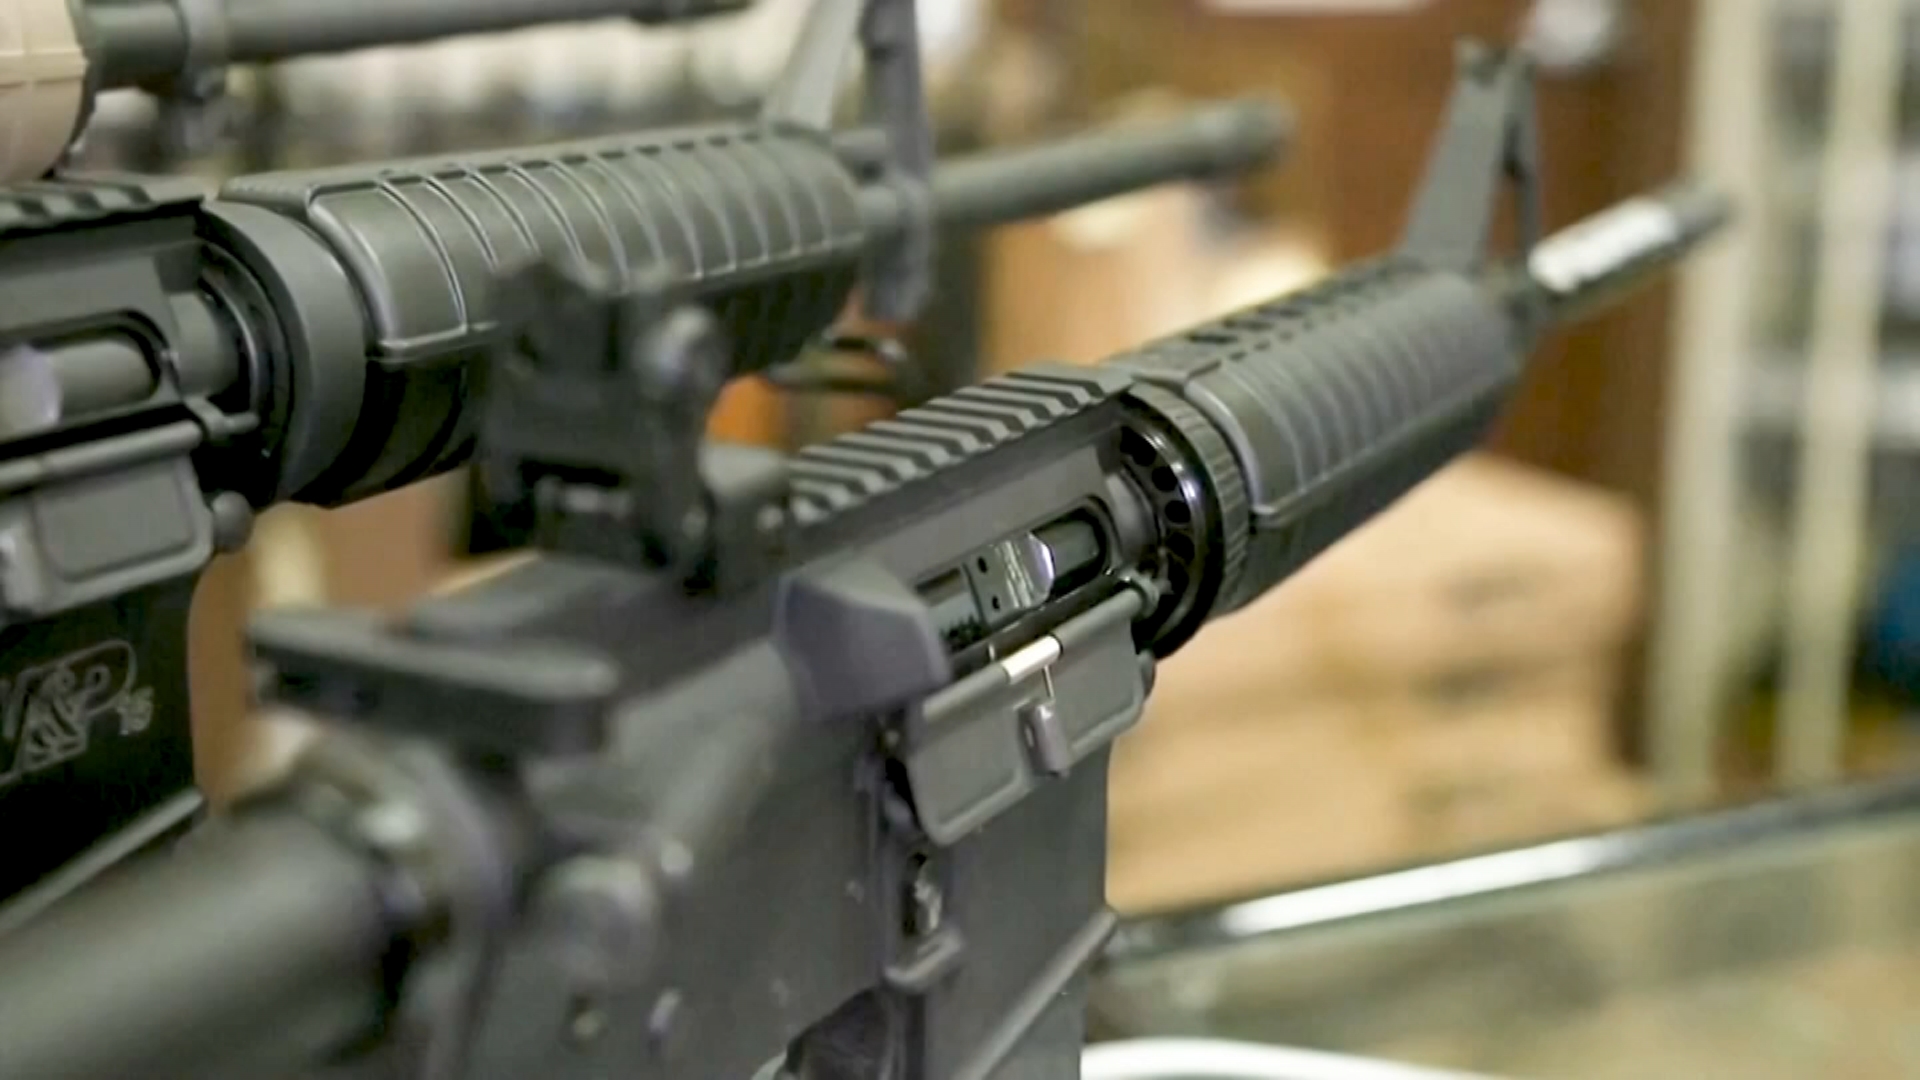 Illinois’ Assault Weapons Ban Faces 1st Legal Challenge With Emergency Hearing, Hundreds of Plaintiffs – NBC Chicago